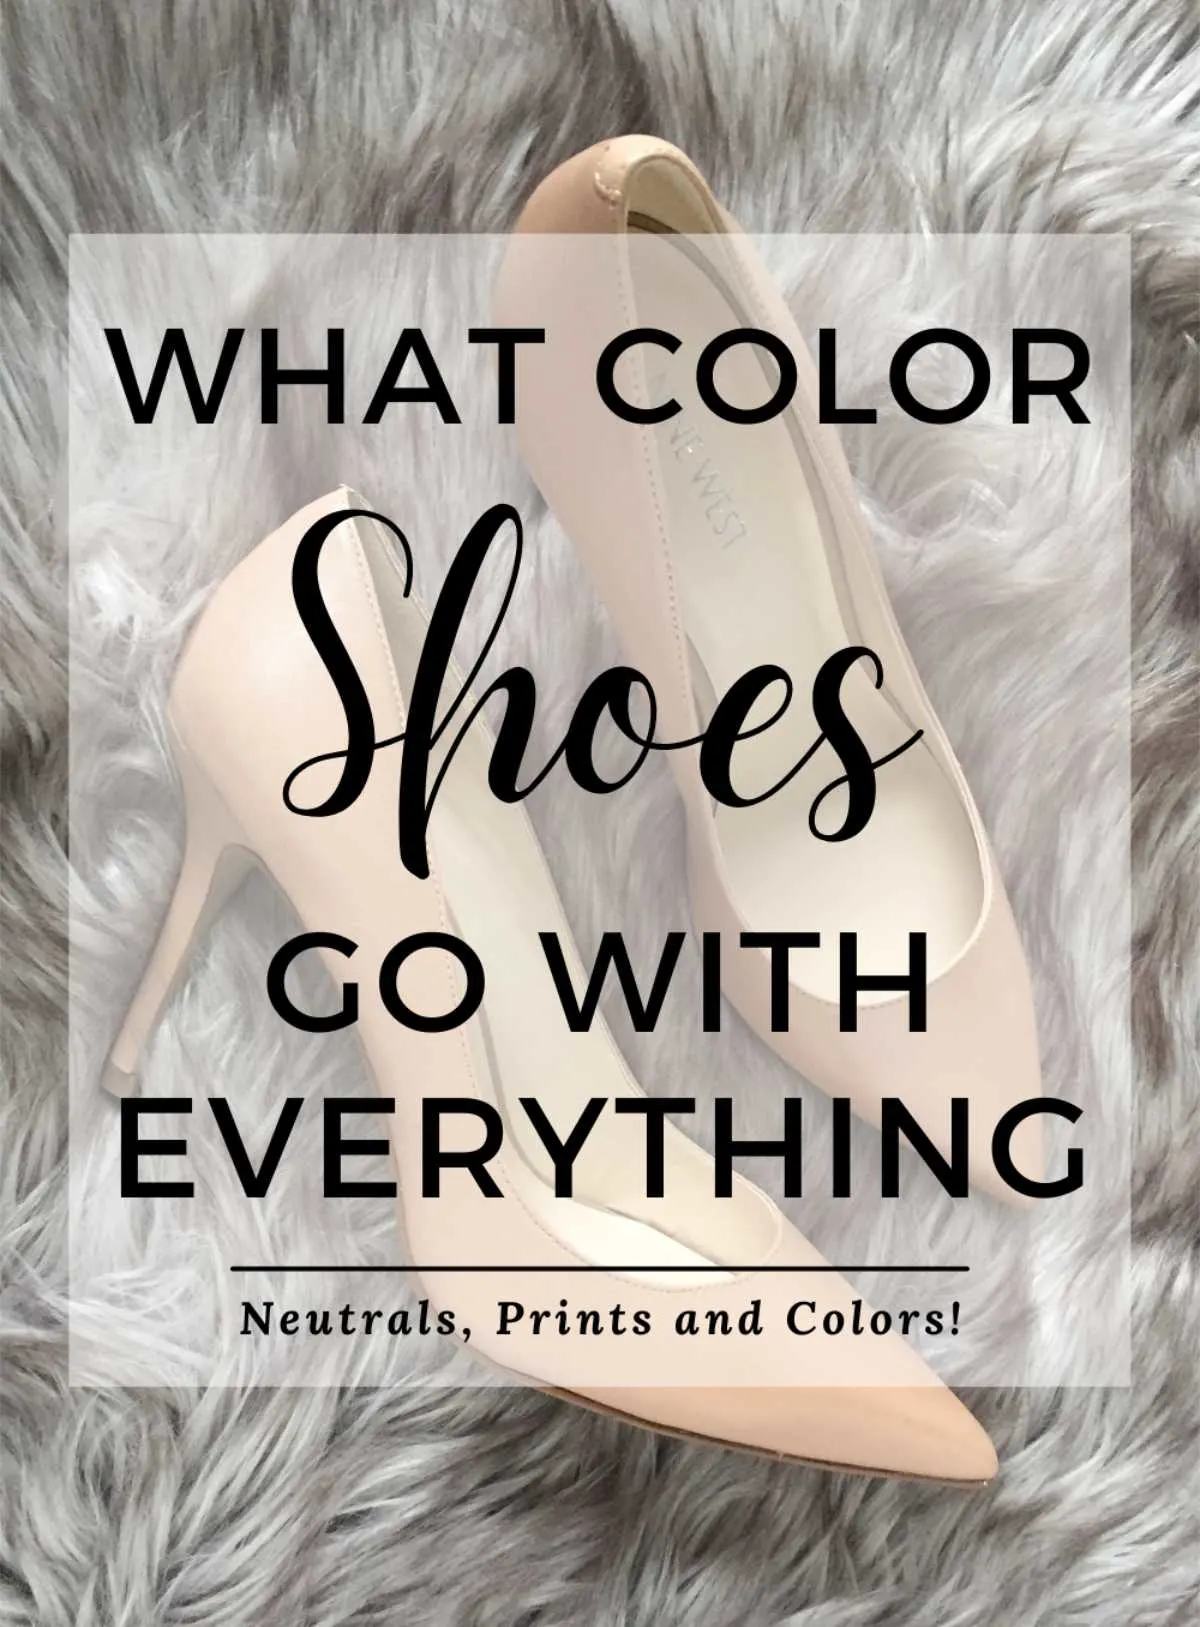 What color shoes go with everything text over photo of blush pink pumps on a carpet.